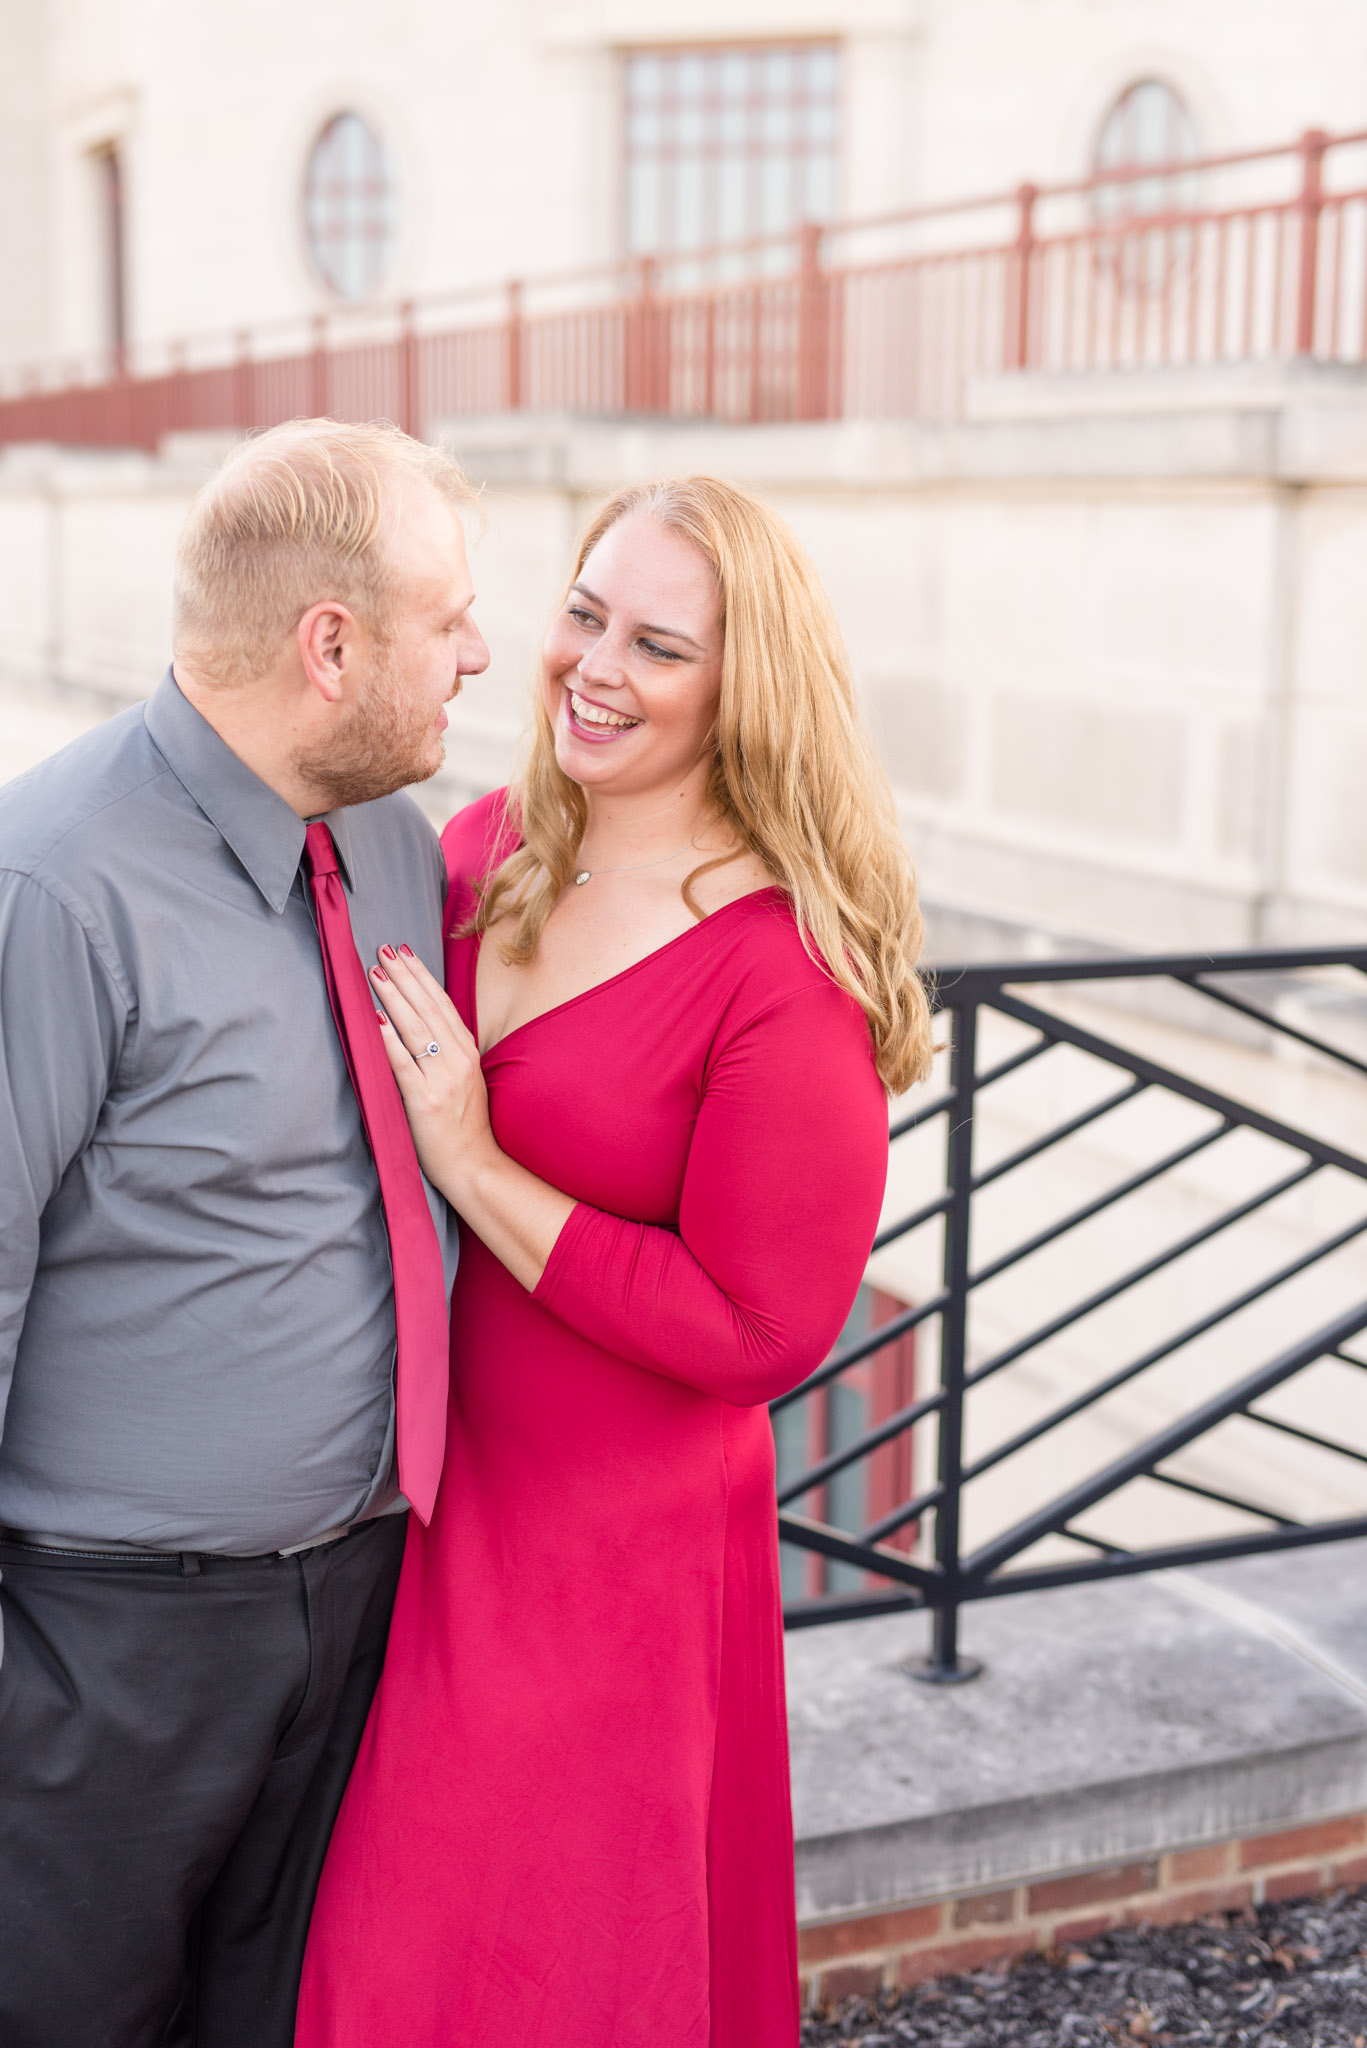 Engaged couple laughs in urban setting.